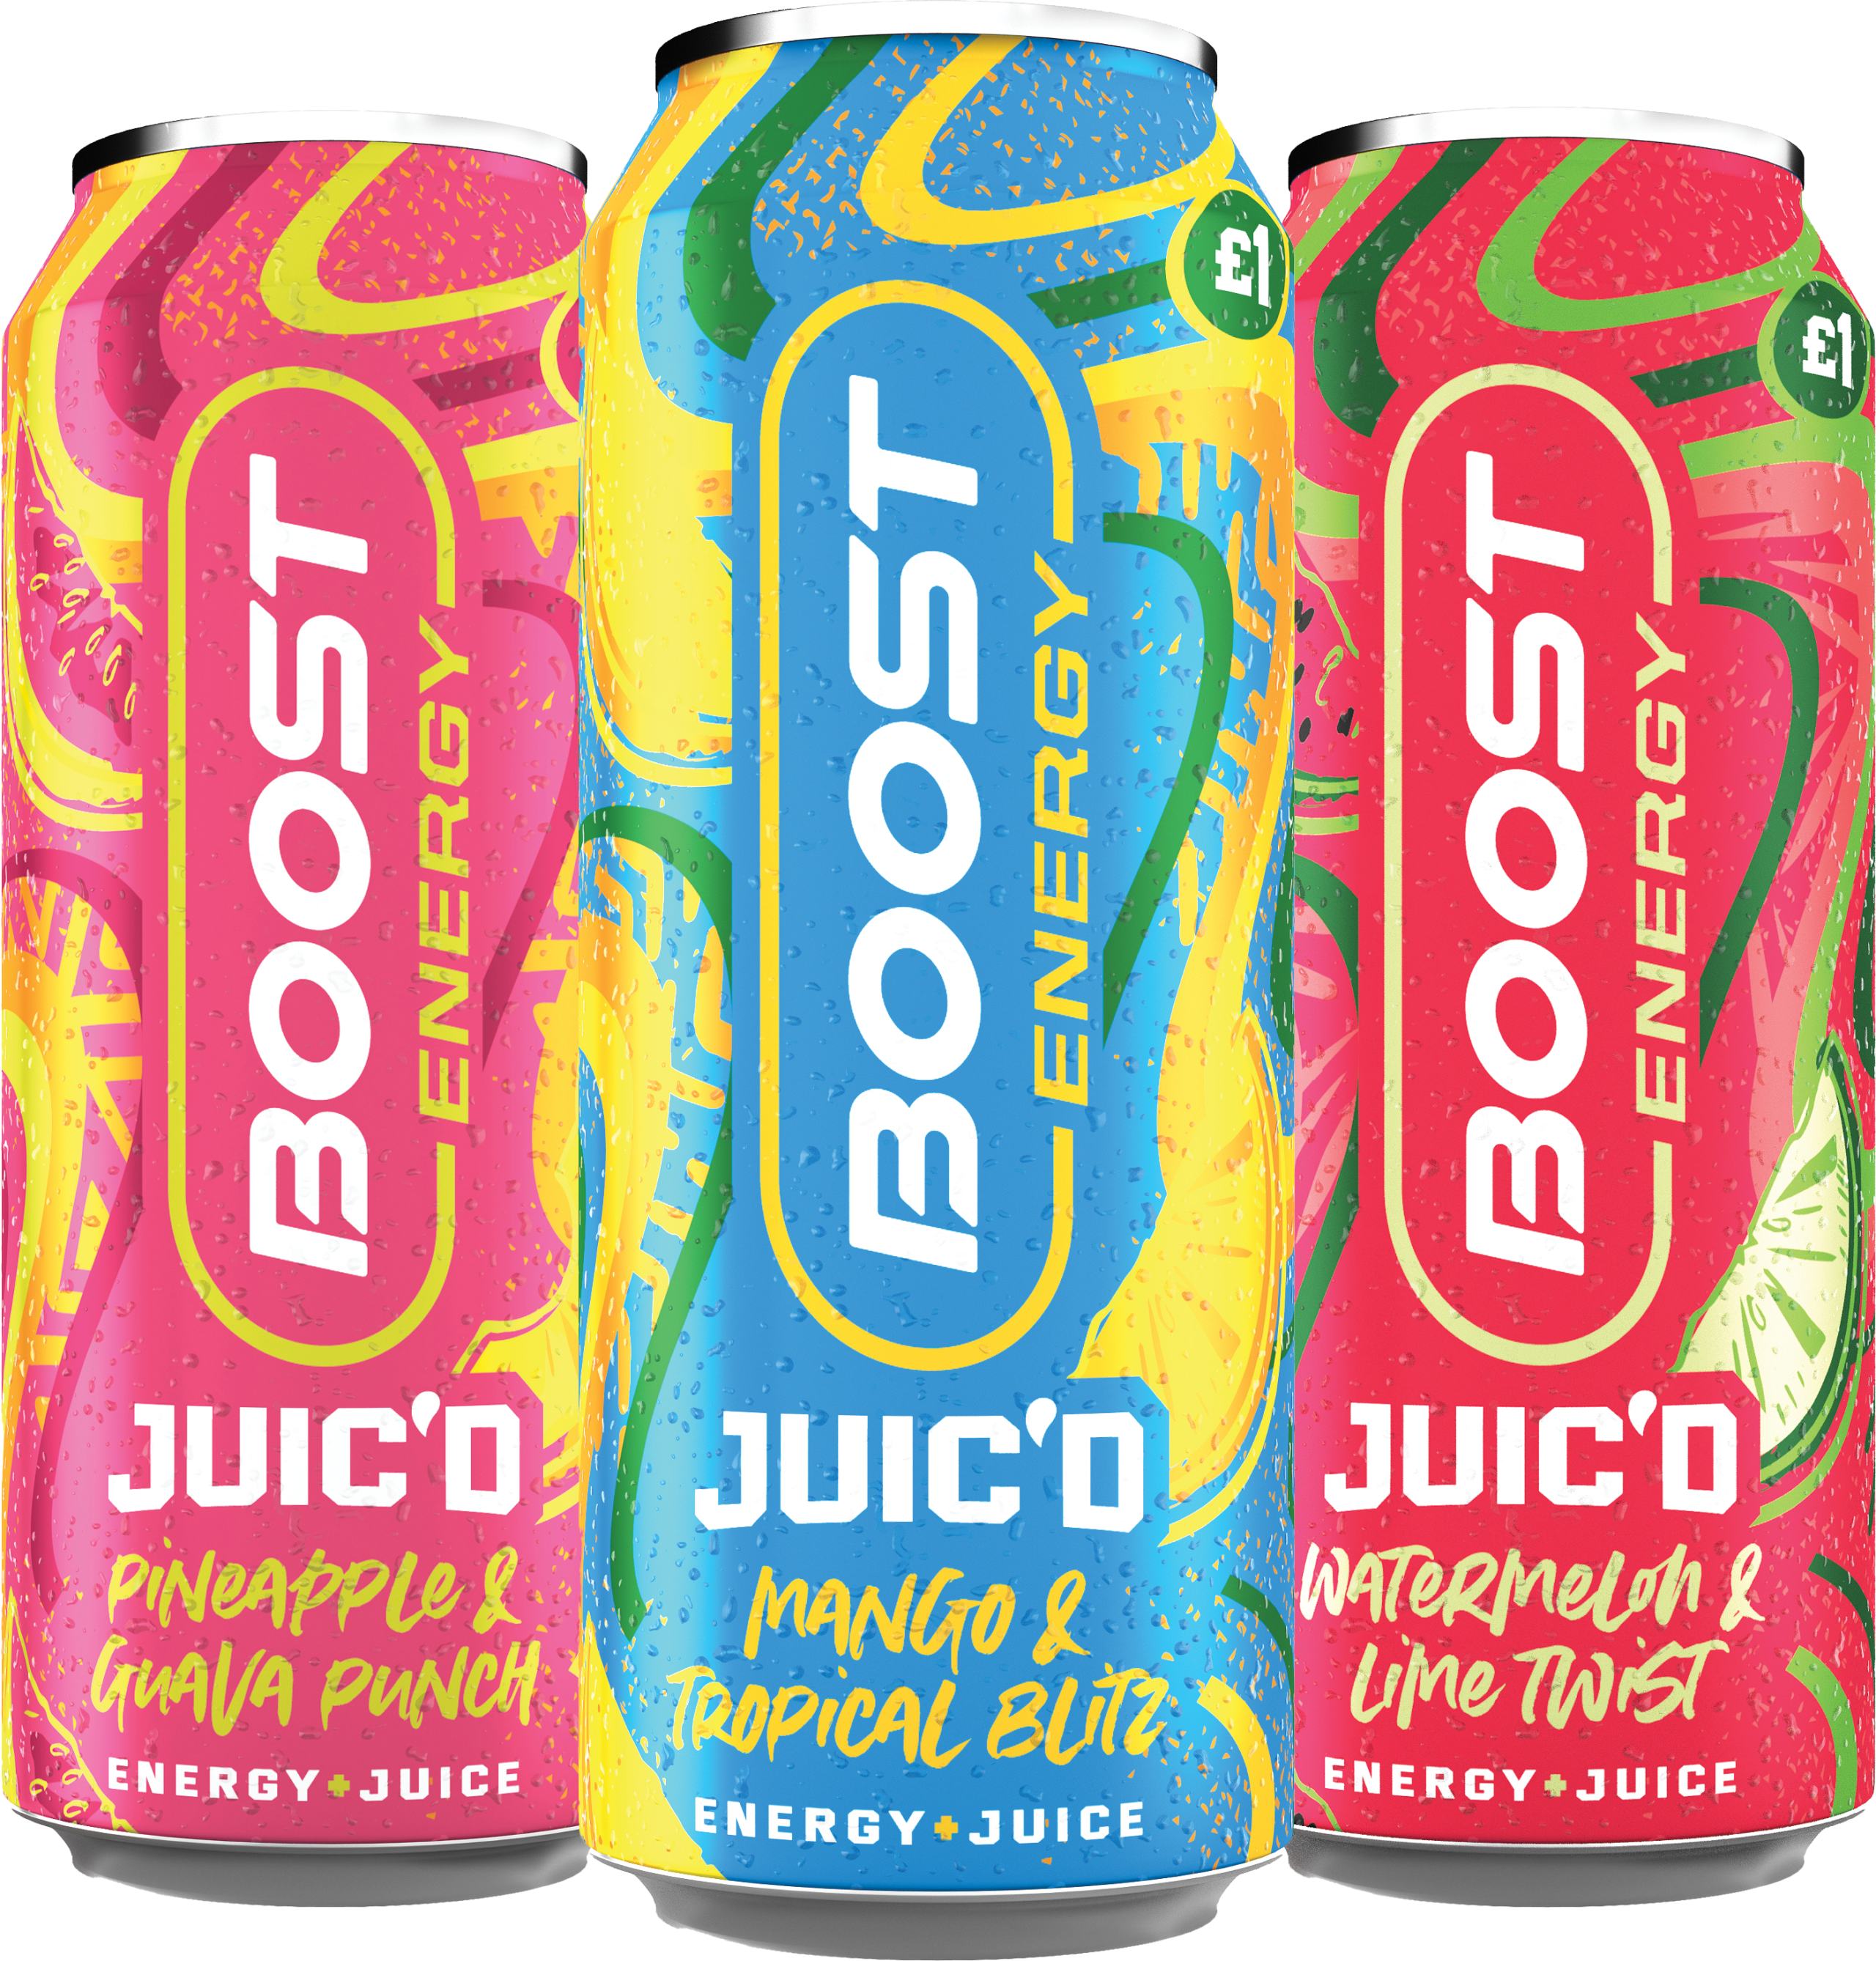 Boost Drinks enters the 500ml can category with new Juic’d range